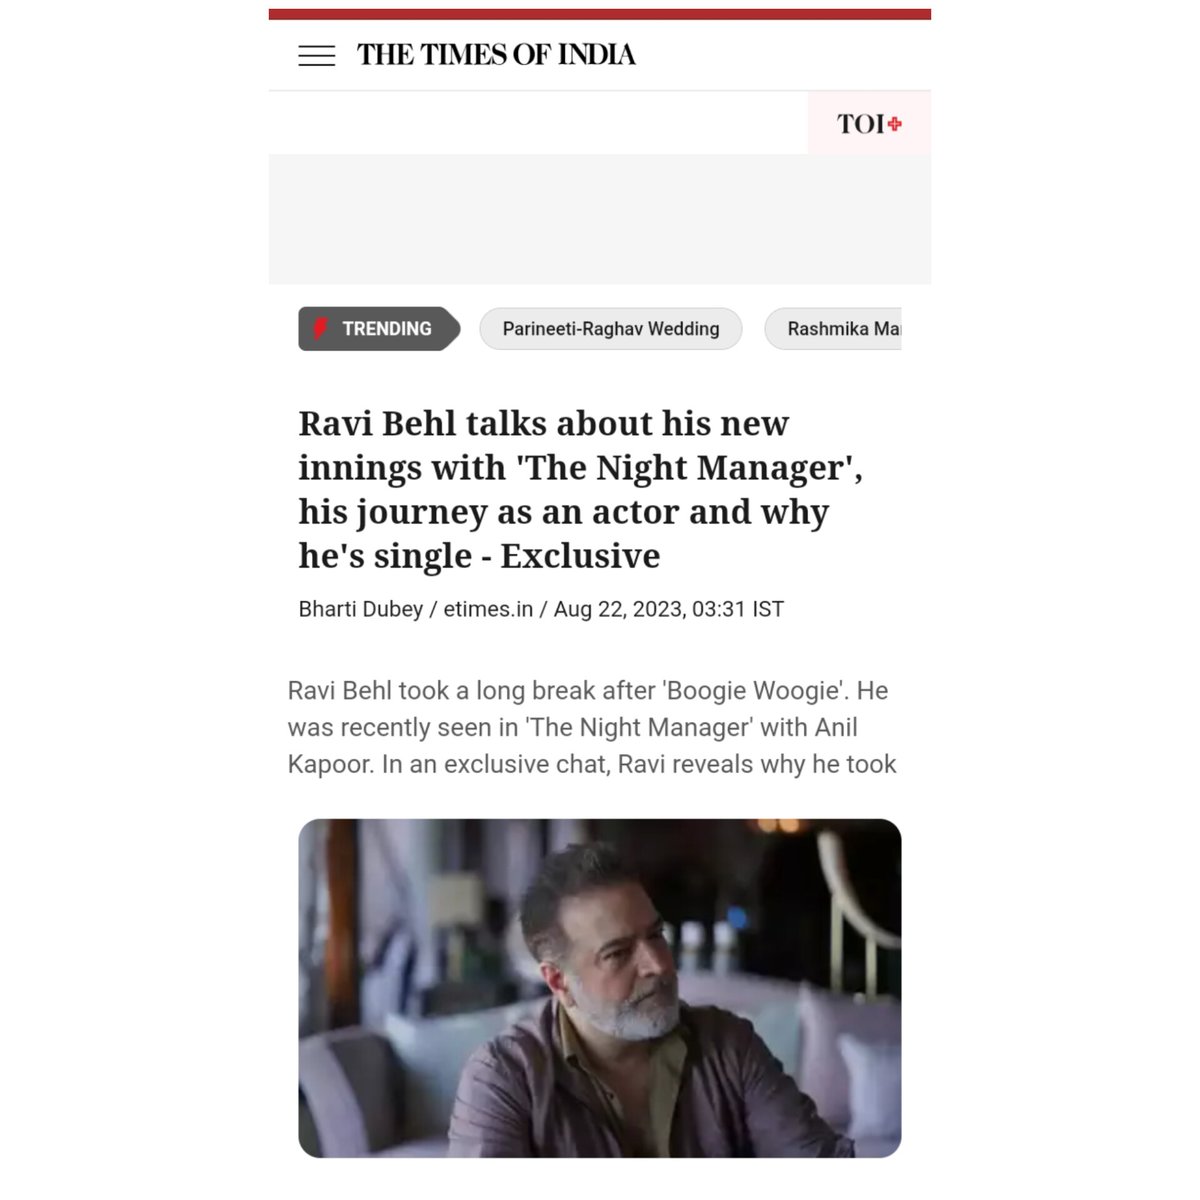 '🌟 Ravi Behl opens up about his exciting 'Night Manager' journey, the actor's life, and his solo adventures in this exclusive interview! 💬🎬 

@timesofindia

#expansionpr #timesofindia #RaviBehl #TheNightManager #ExclusiveInterview #ActorLife #SoloAdventures'